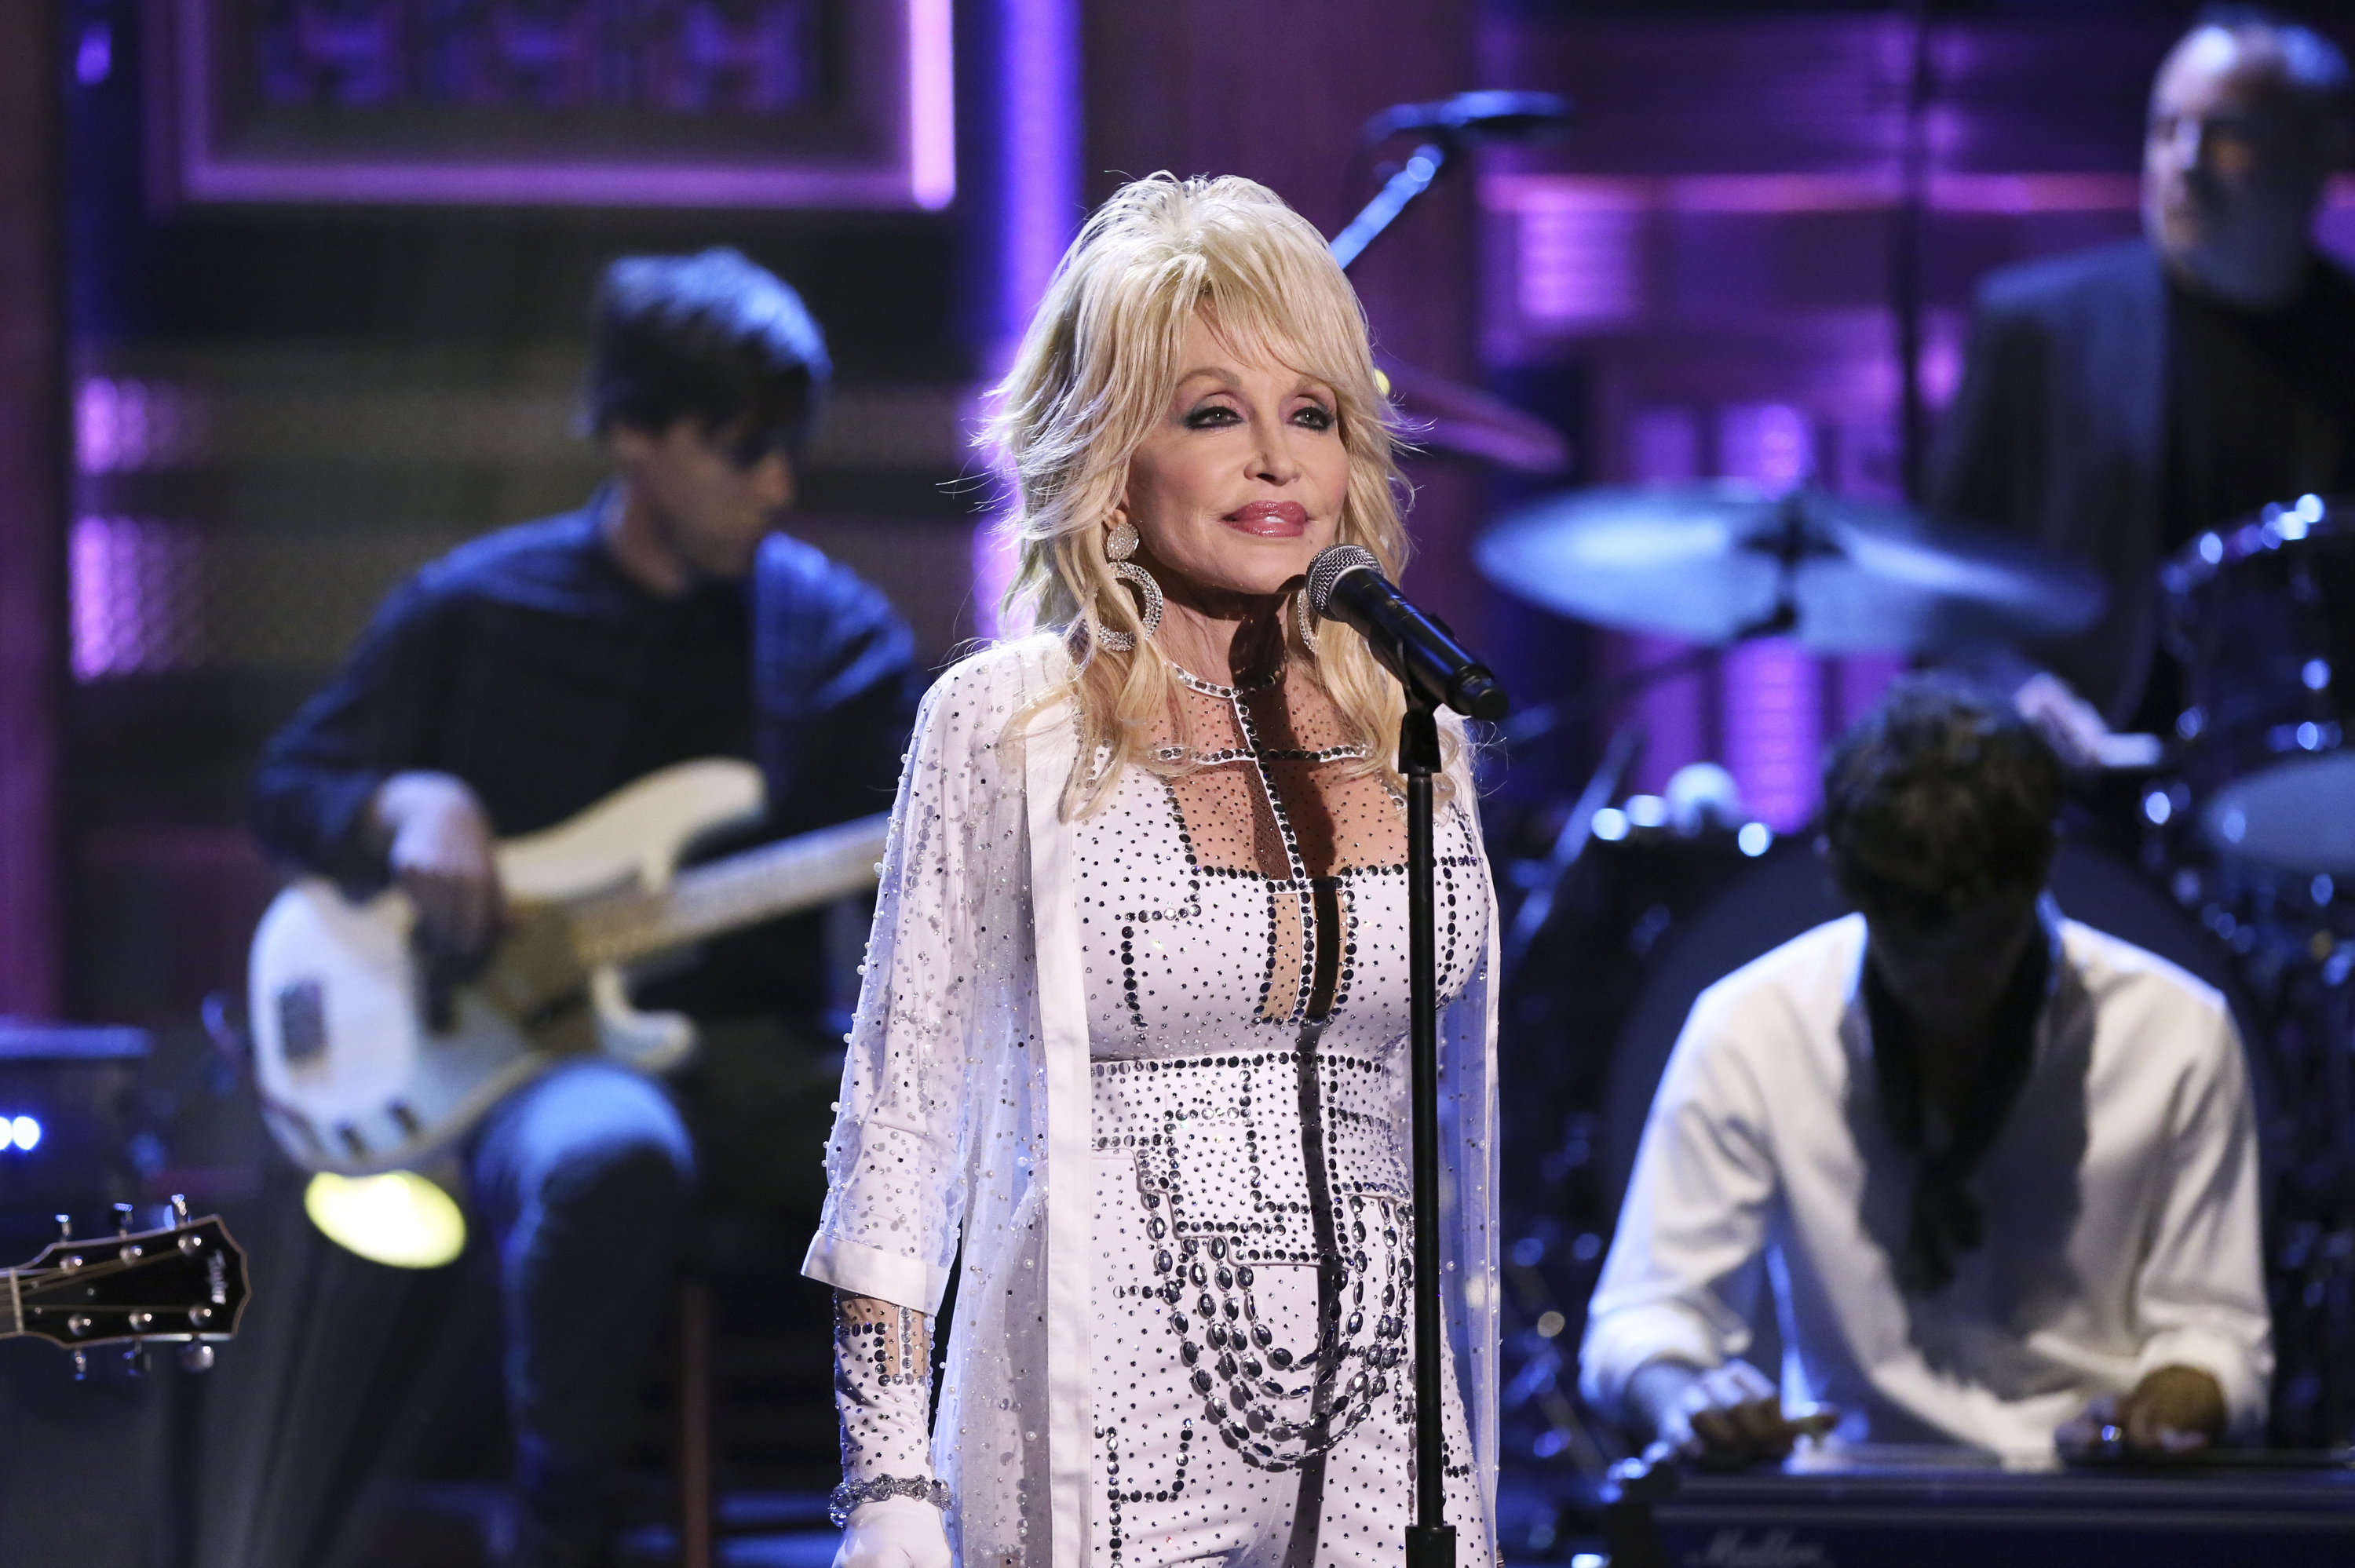 Dolly Parton wears a white dress with silver rhinestones and stands in front of a microphone.